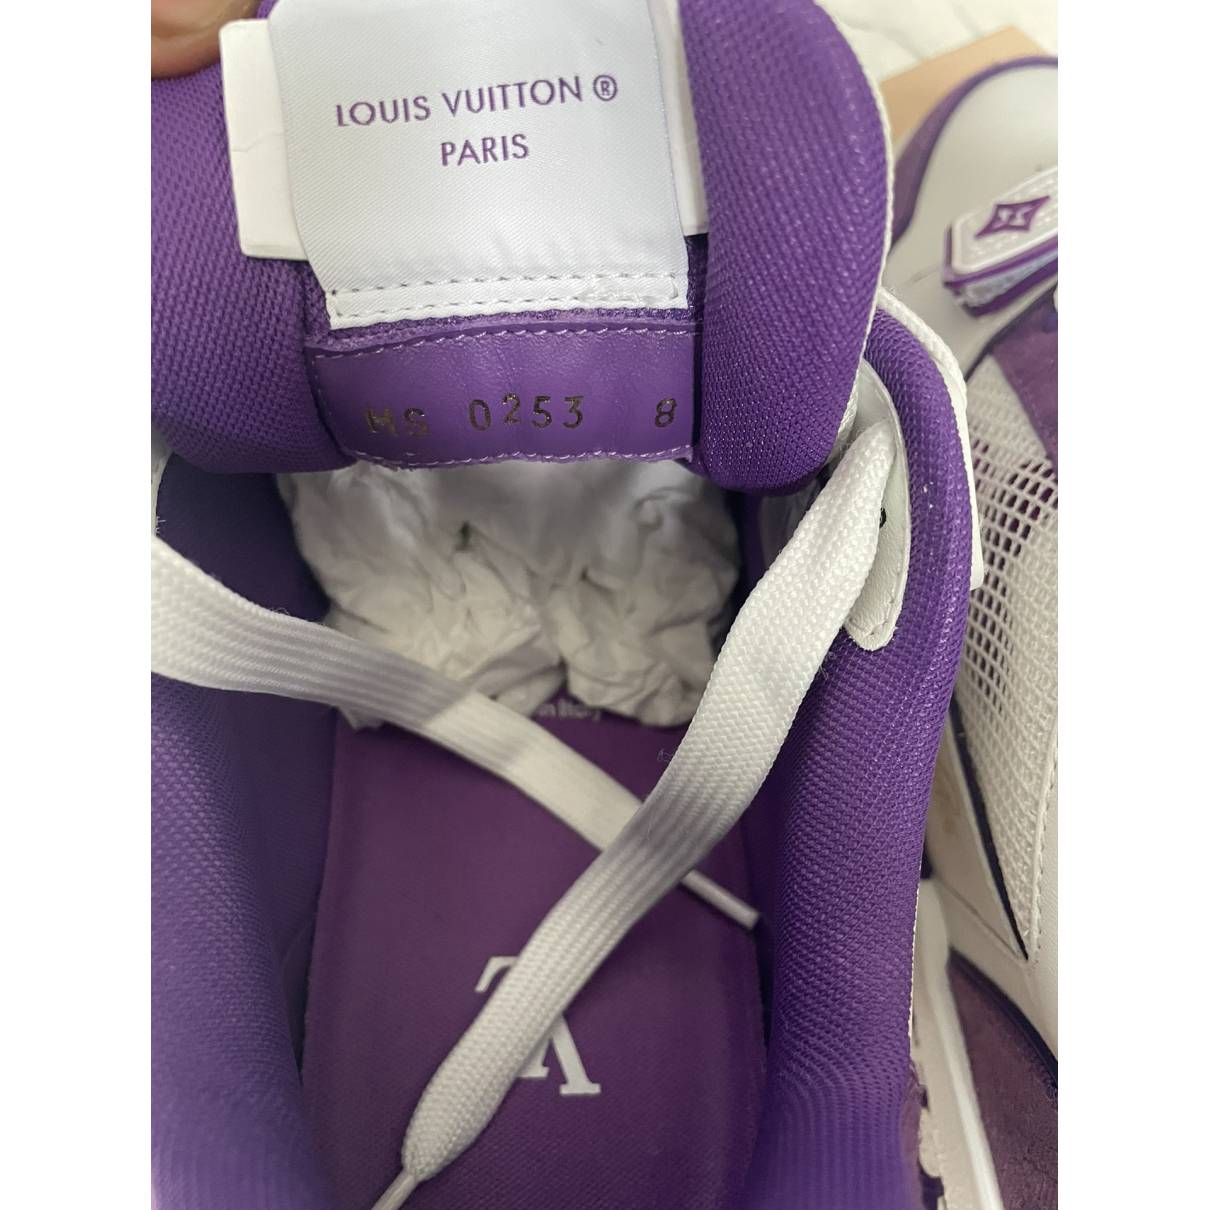 Lv trainer leather low trainers Louis Vuitton Purple size 8 UK in Leather -  35795577